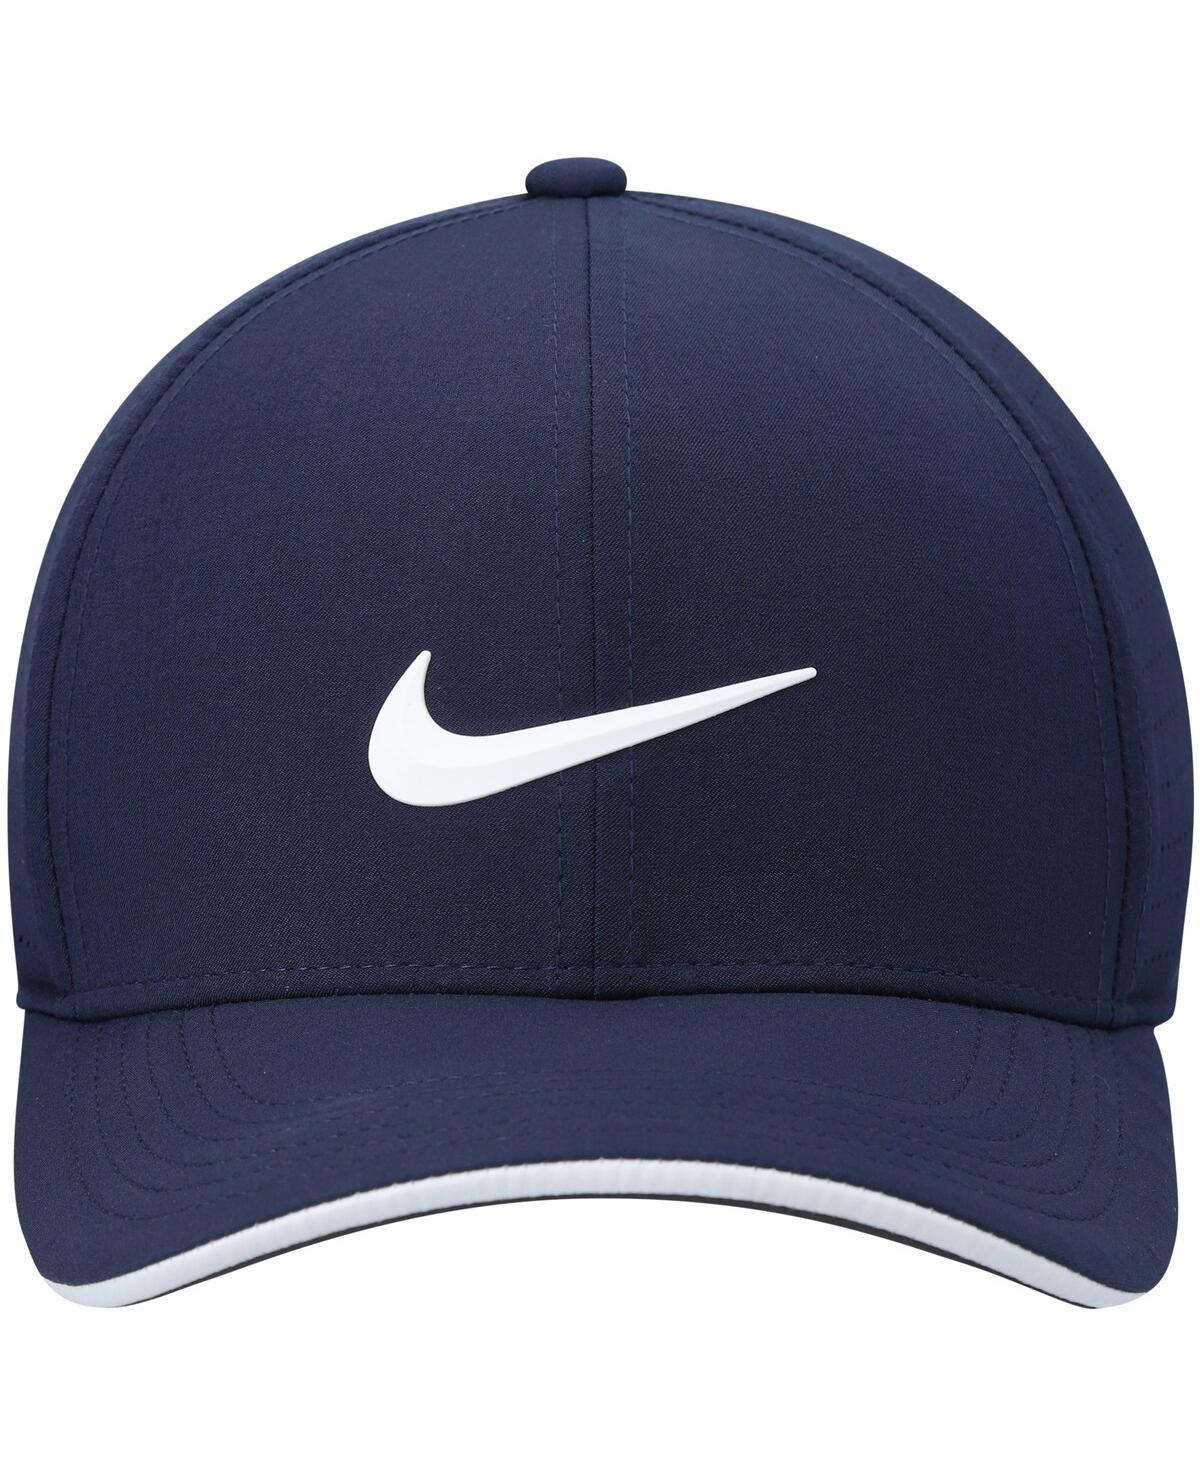 Shop Nike Men's  Golf Navy Aerobill Classic99 Performance Fitted Hat